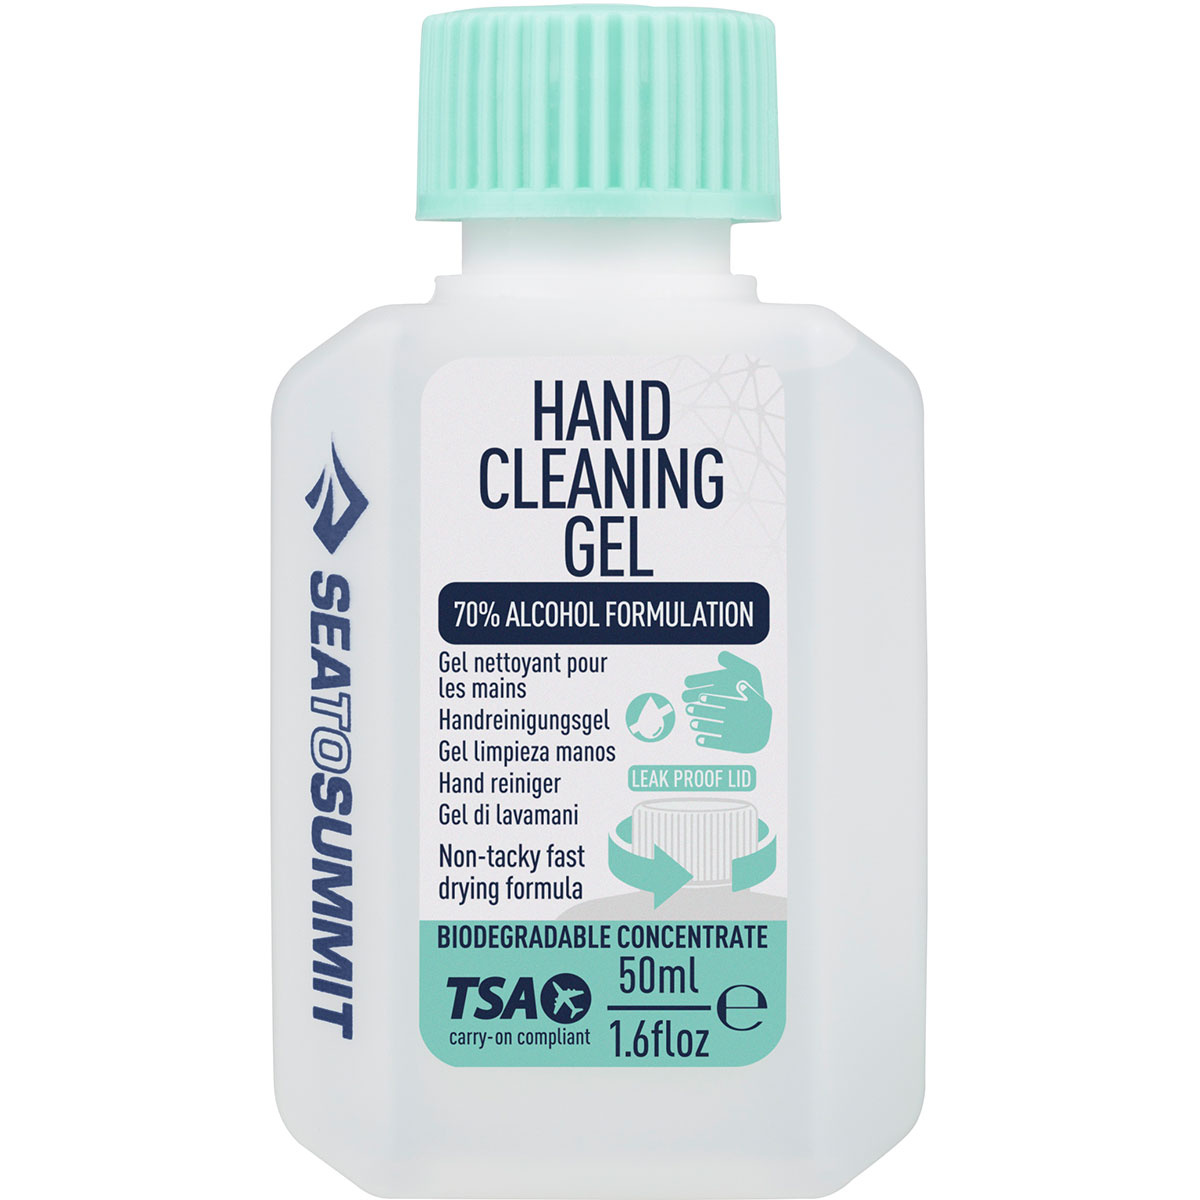 Sea to Summit Hand Cleaning Gel